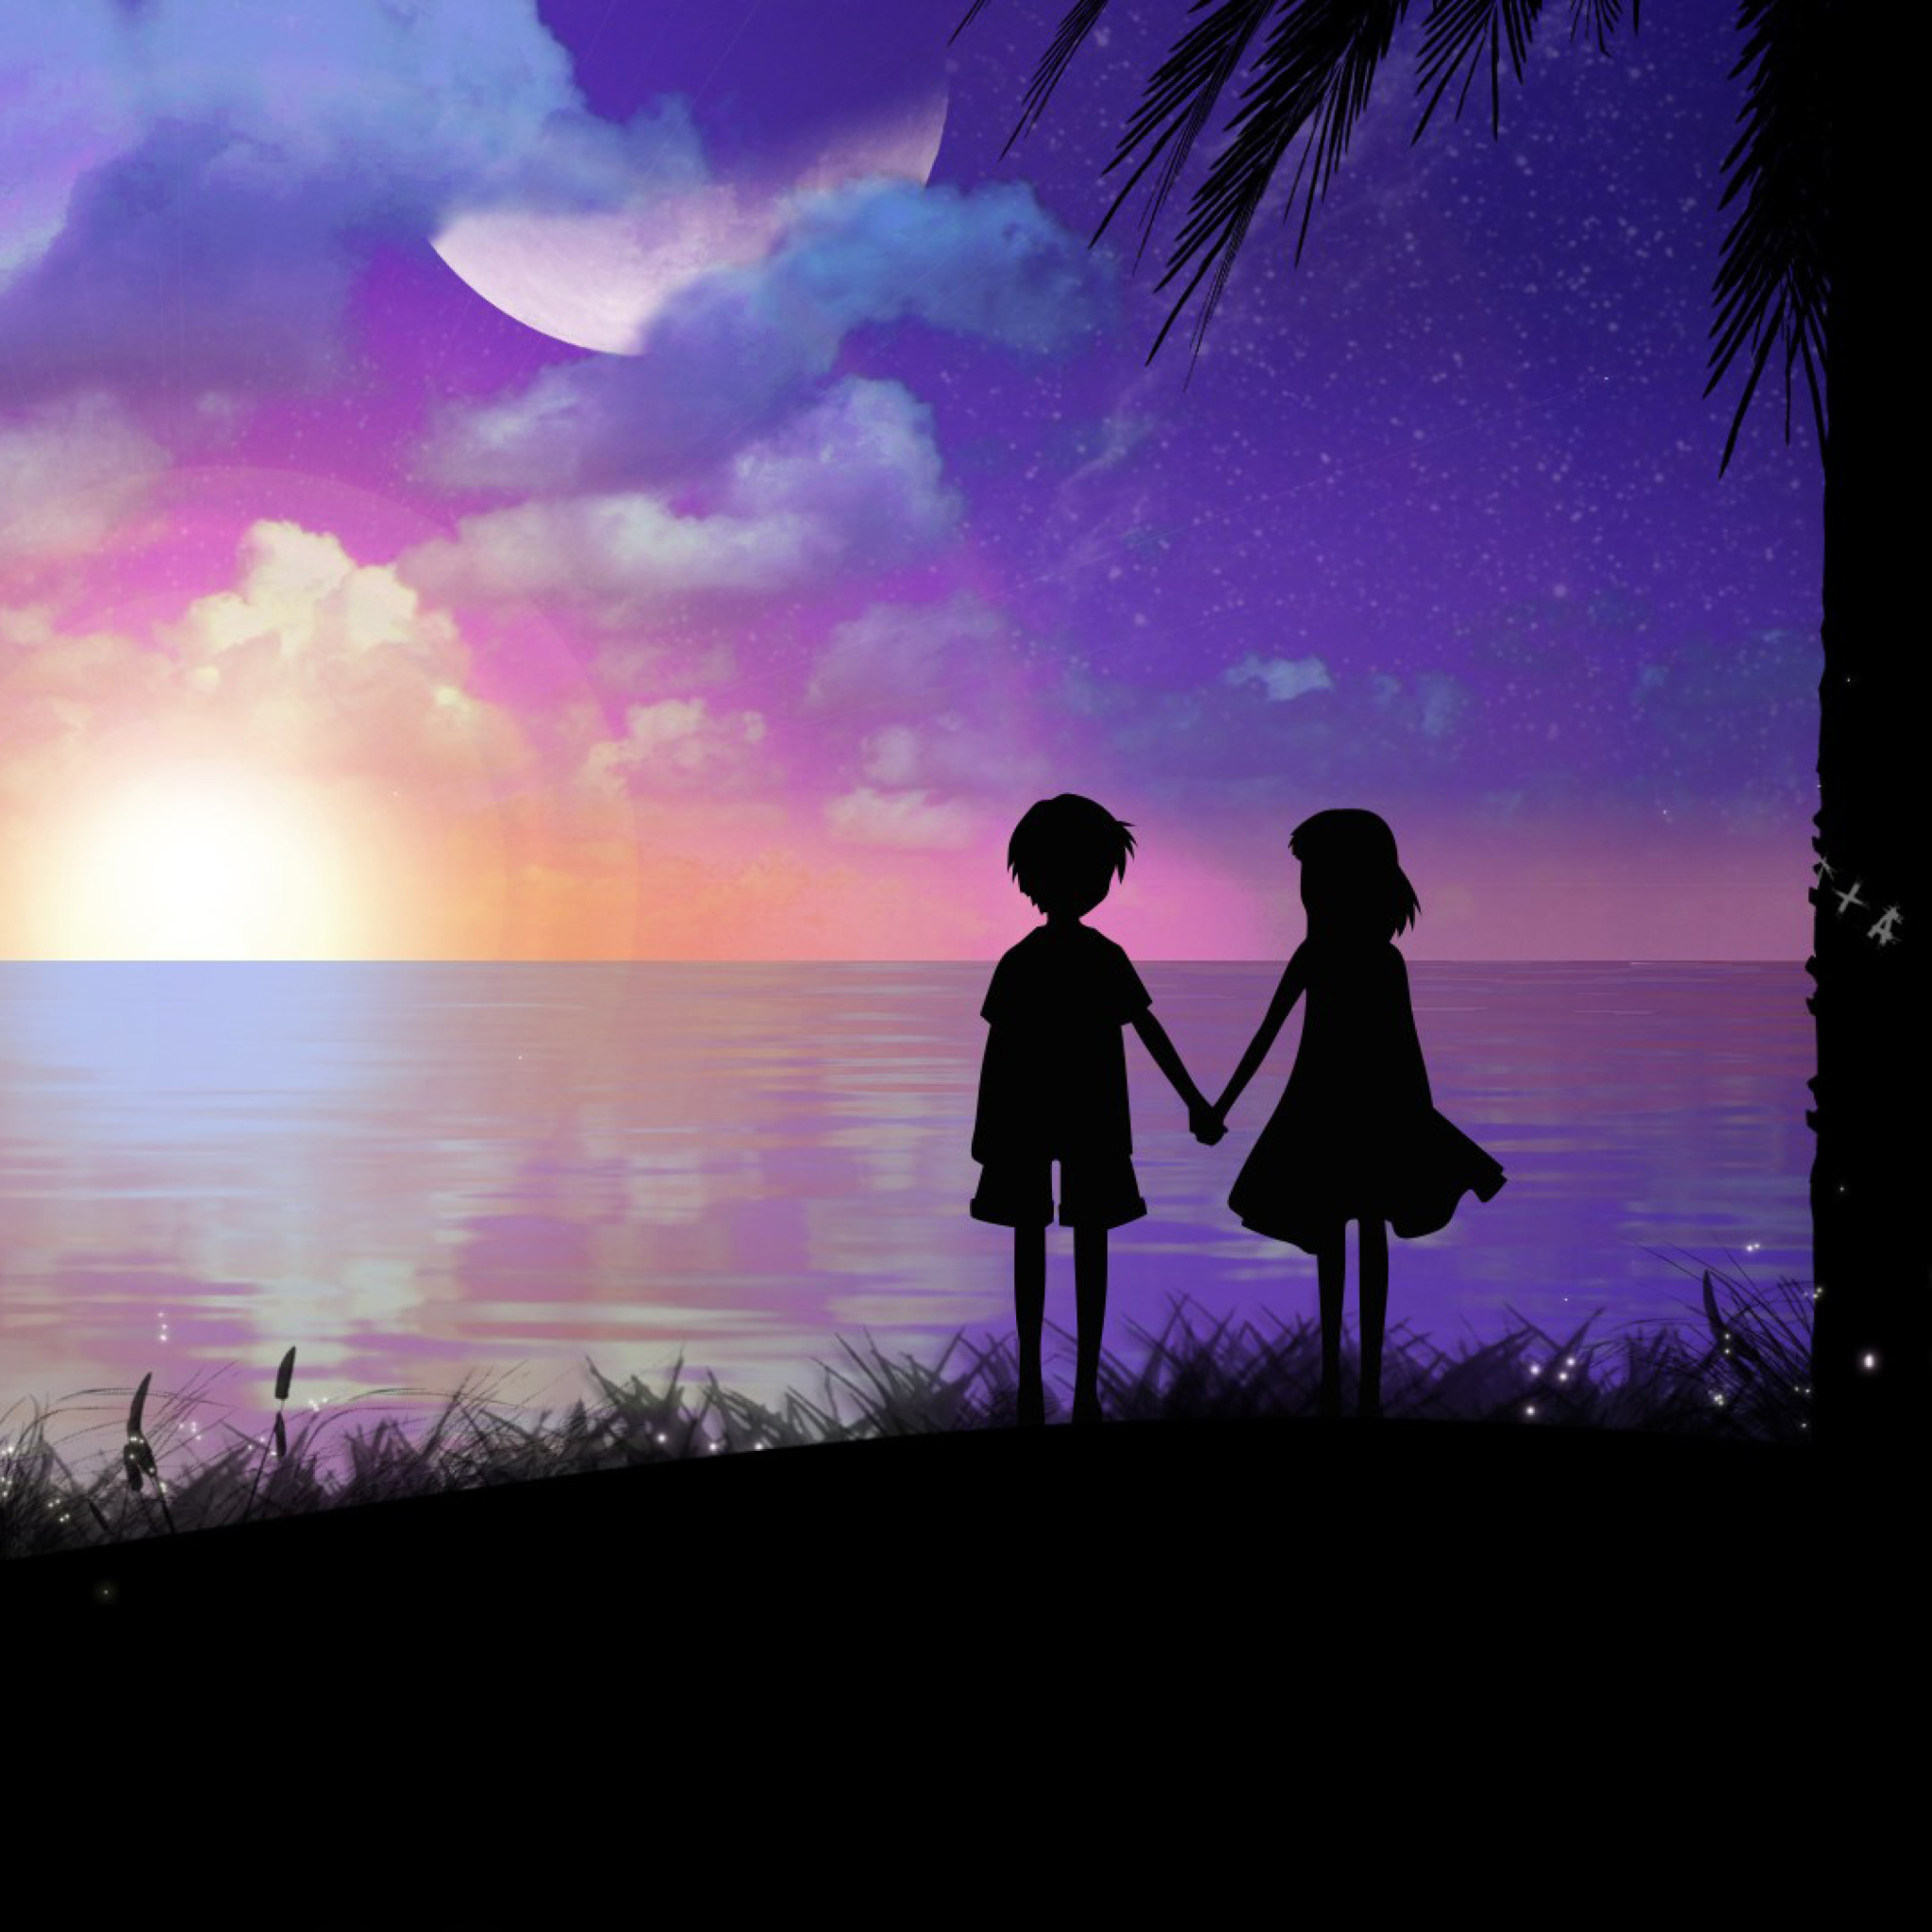 Holding Hands At Sunset Wallpaper for iPad 3